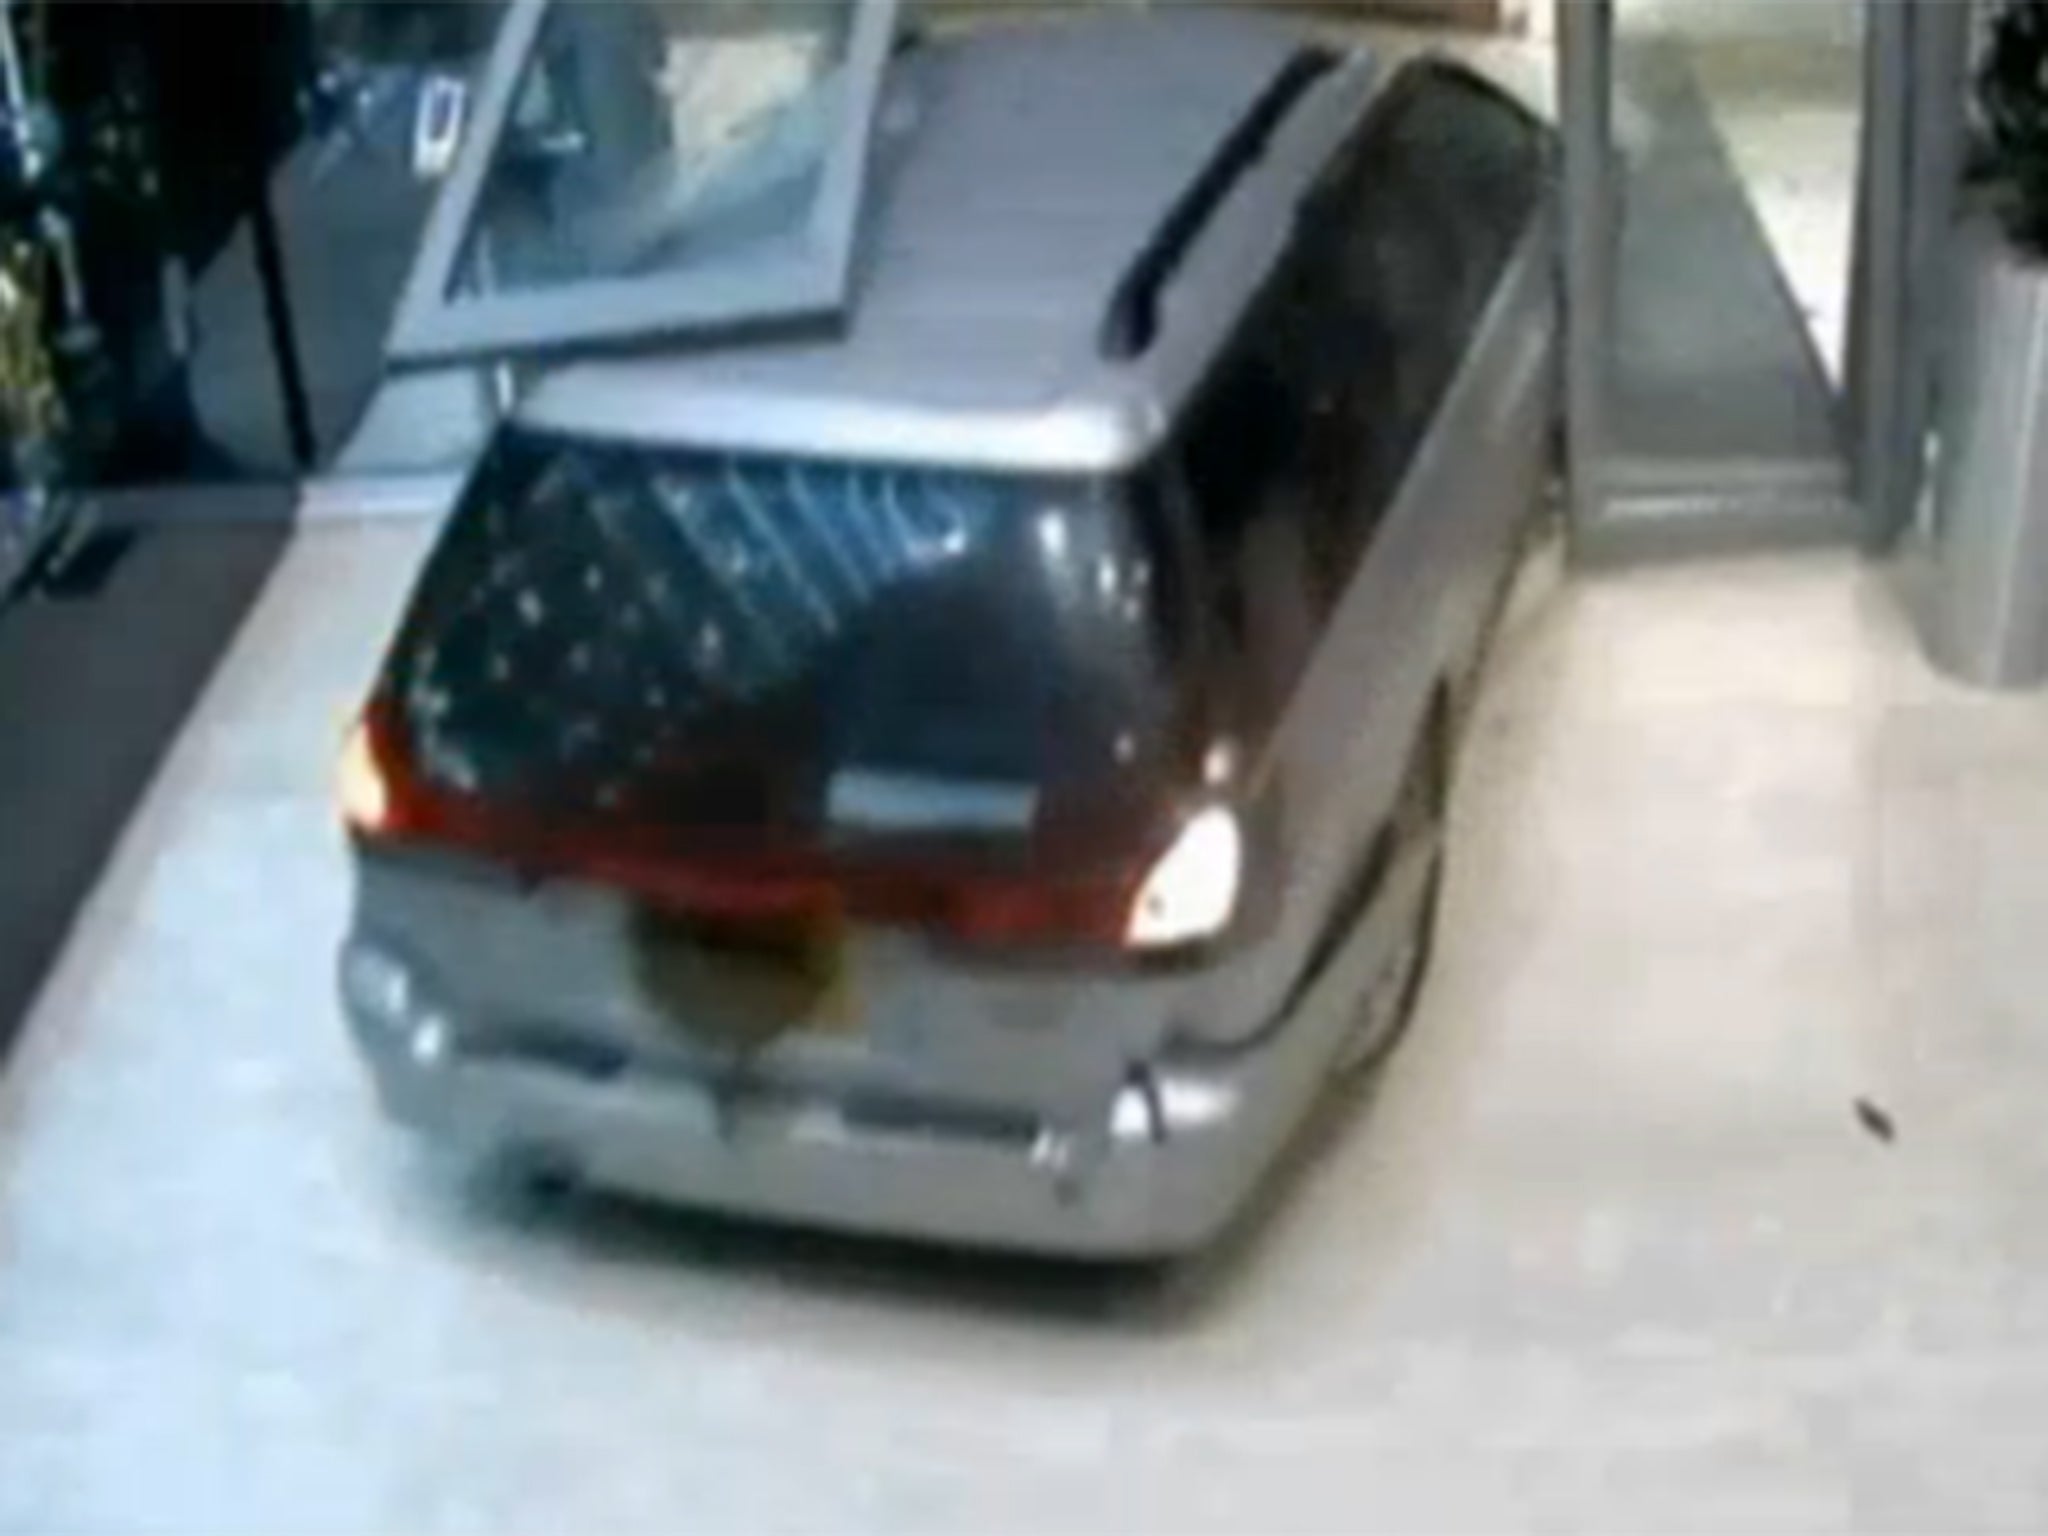 Thieves broke into the factory after they rammed a 4x4 through a glass front